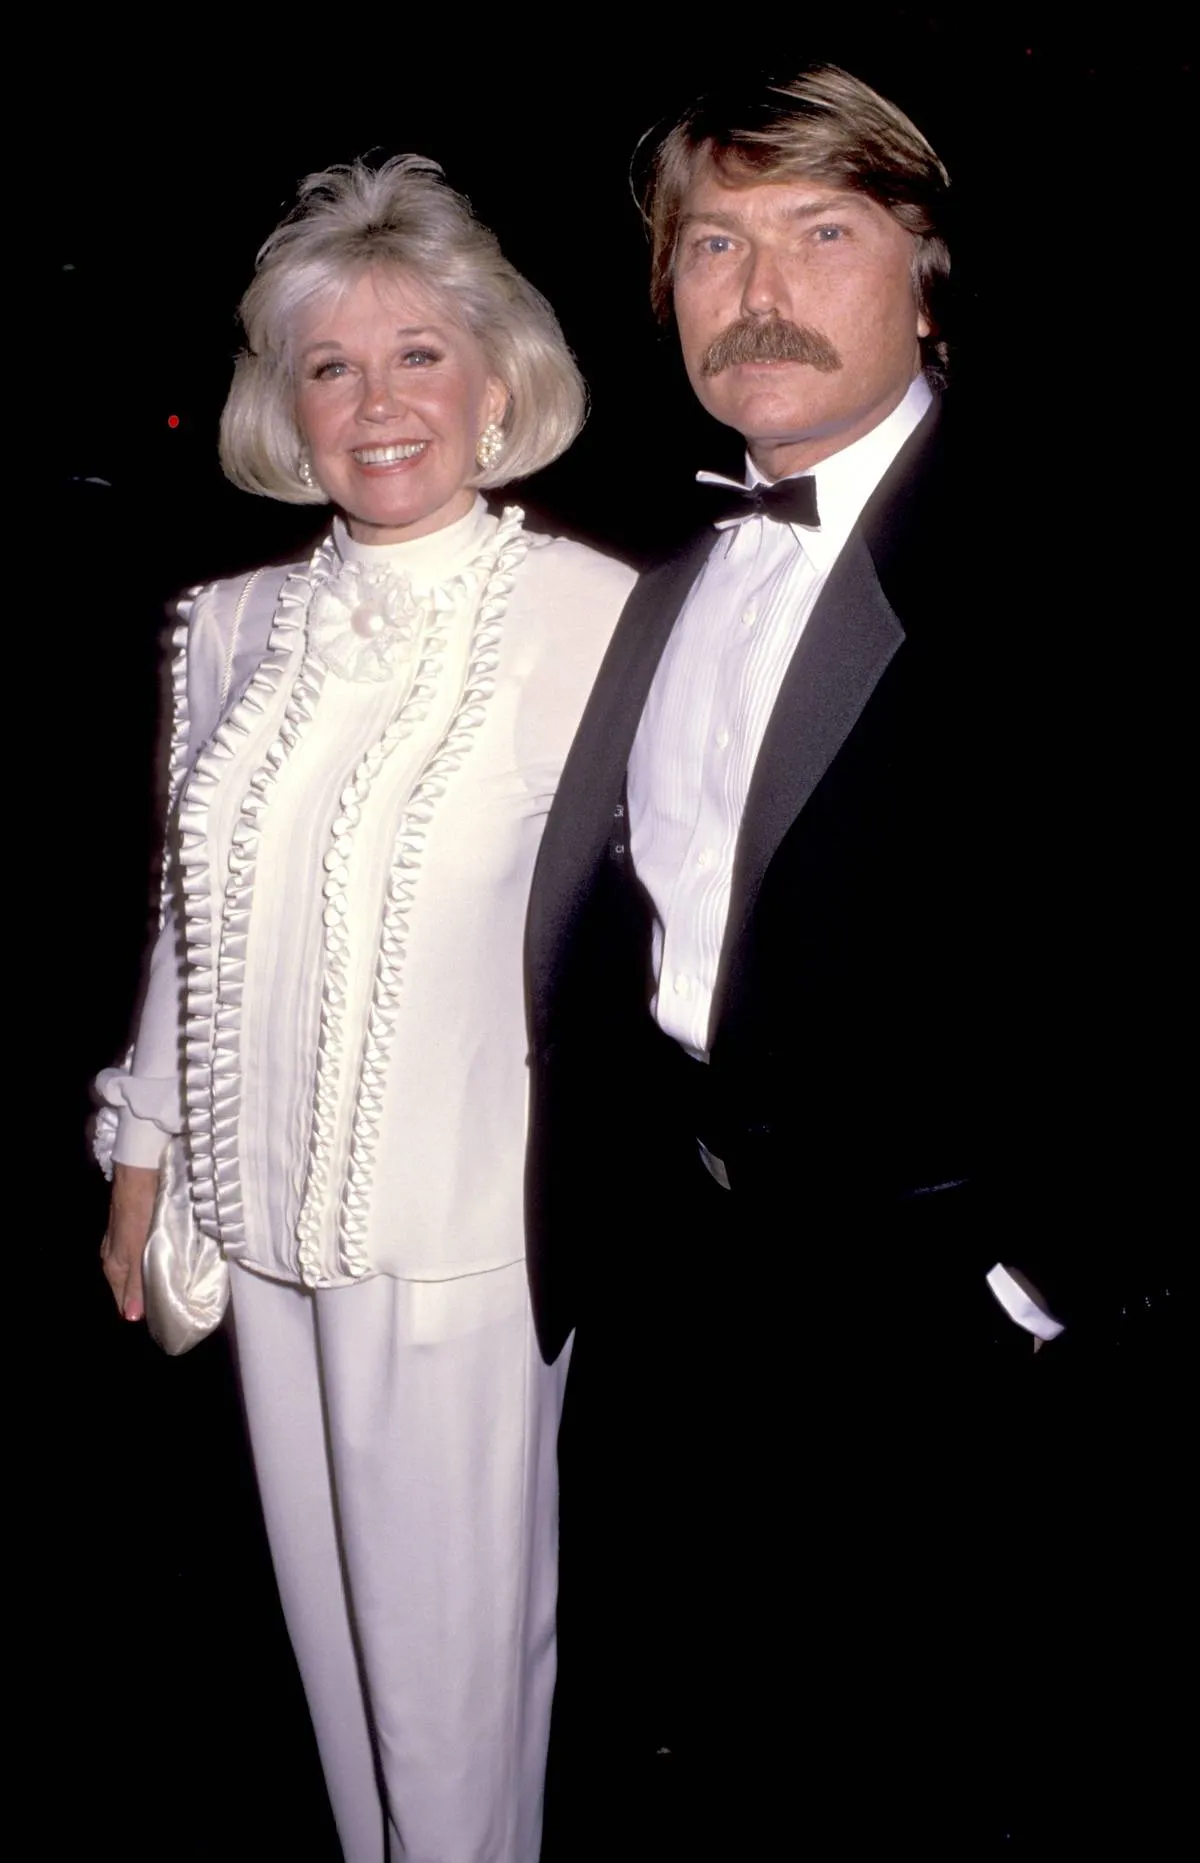 Doris Day and Terry Melcher pose for a photo together.